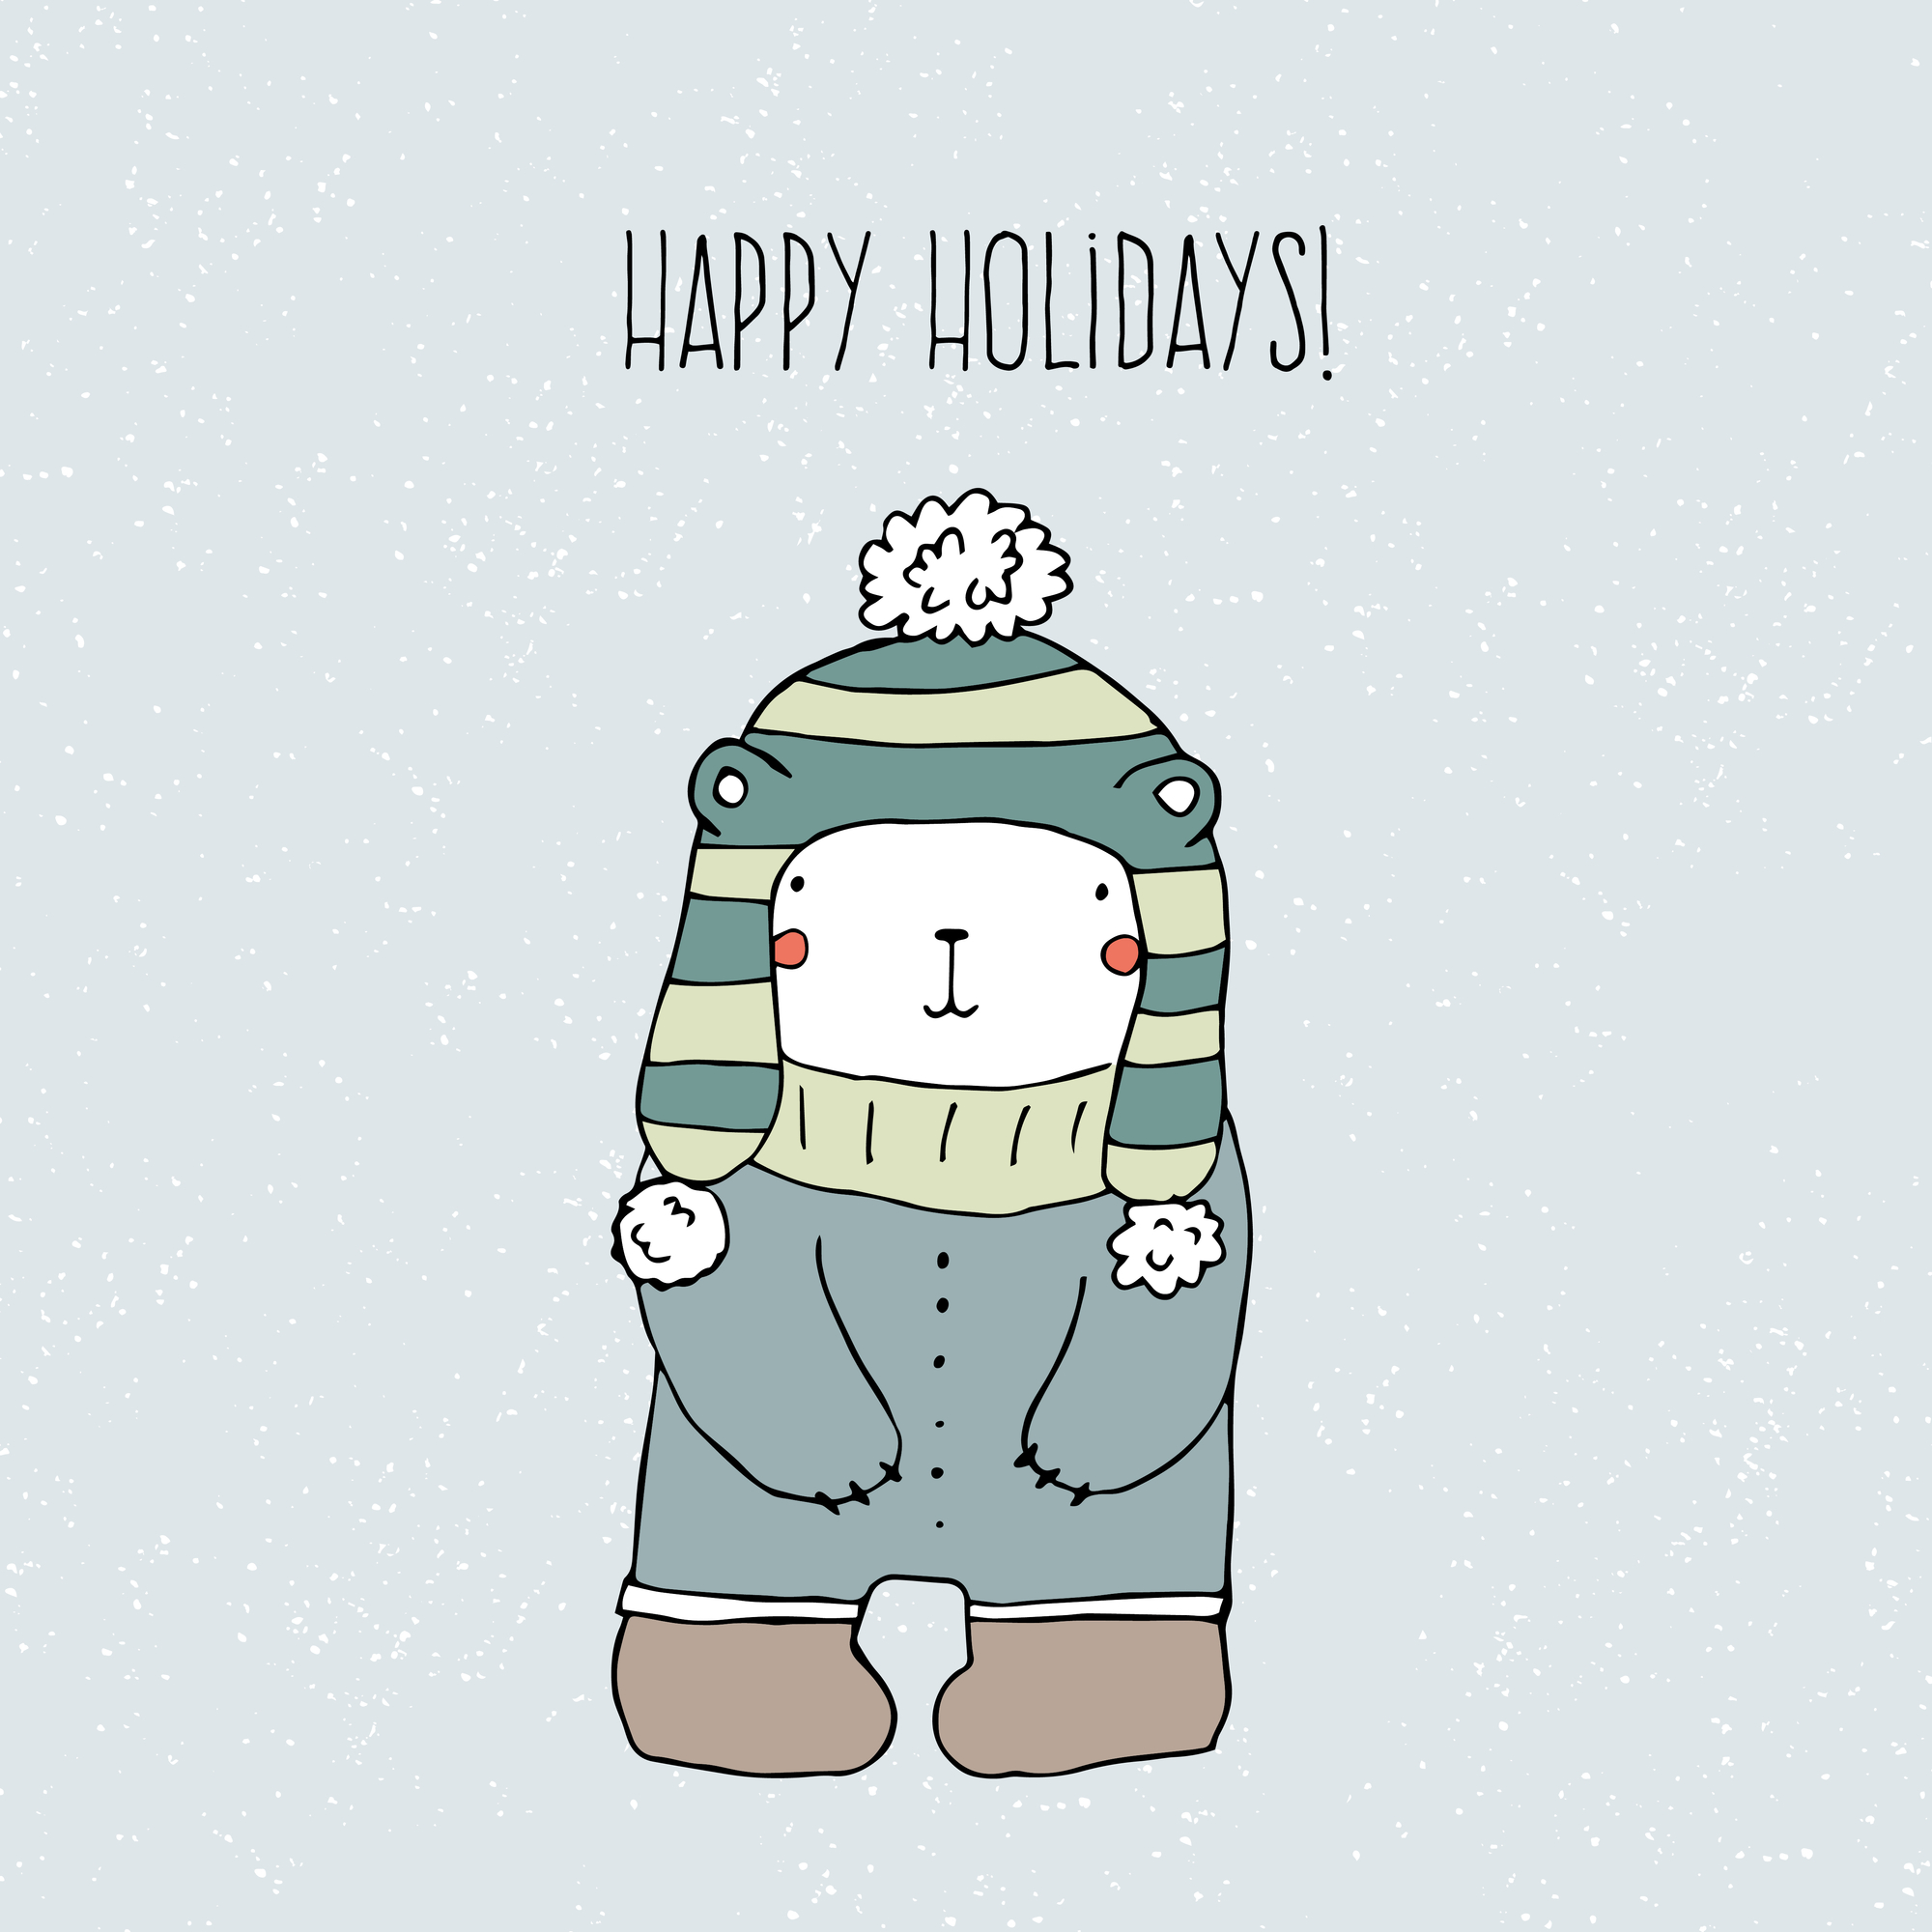 Happy Holidays From GillAgency